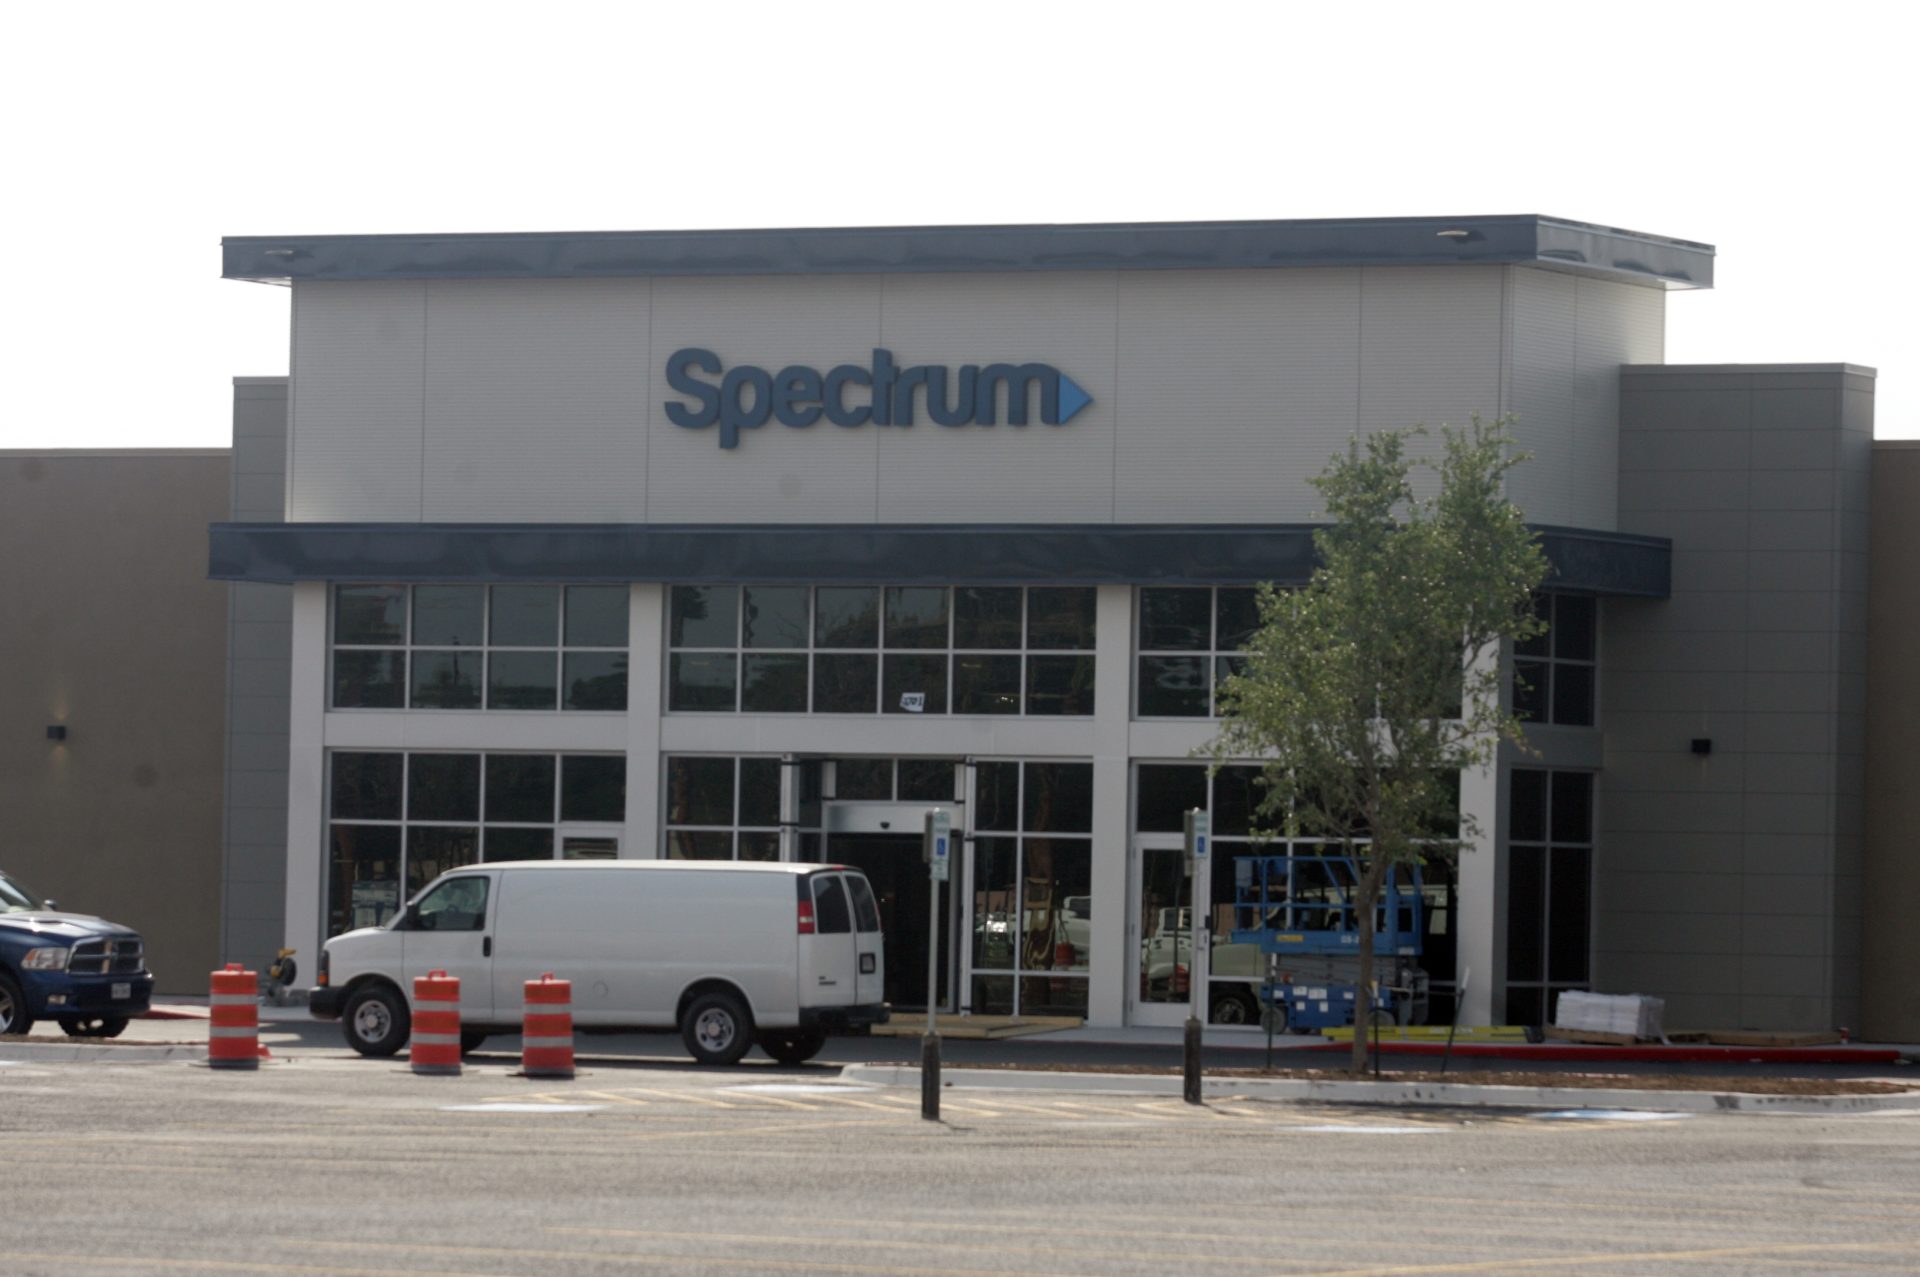 Texas reacts with disgust to Spectrum’s massive internet outage